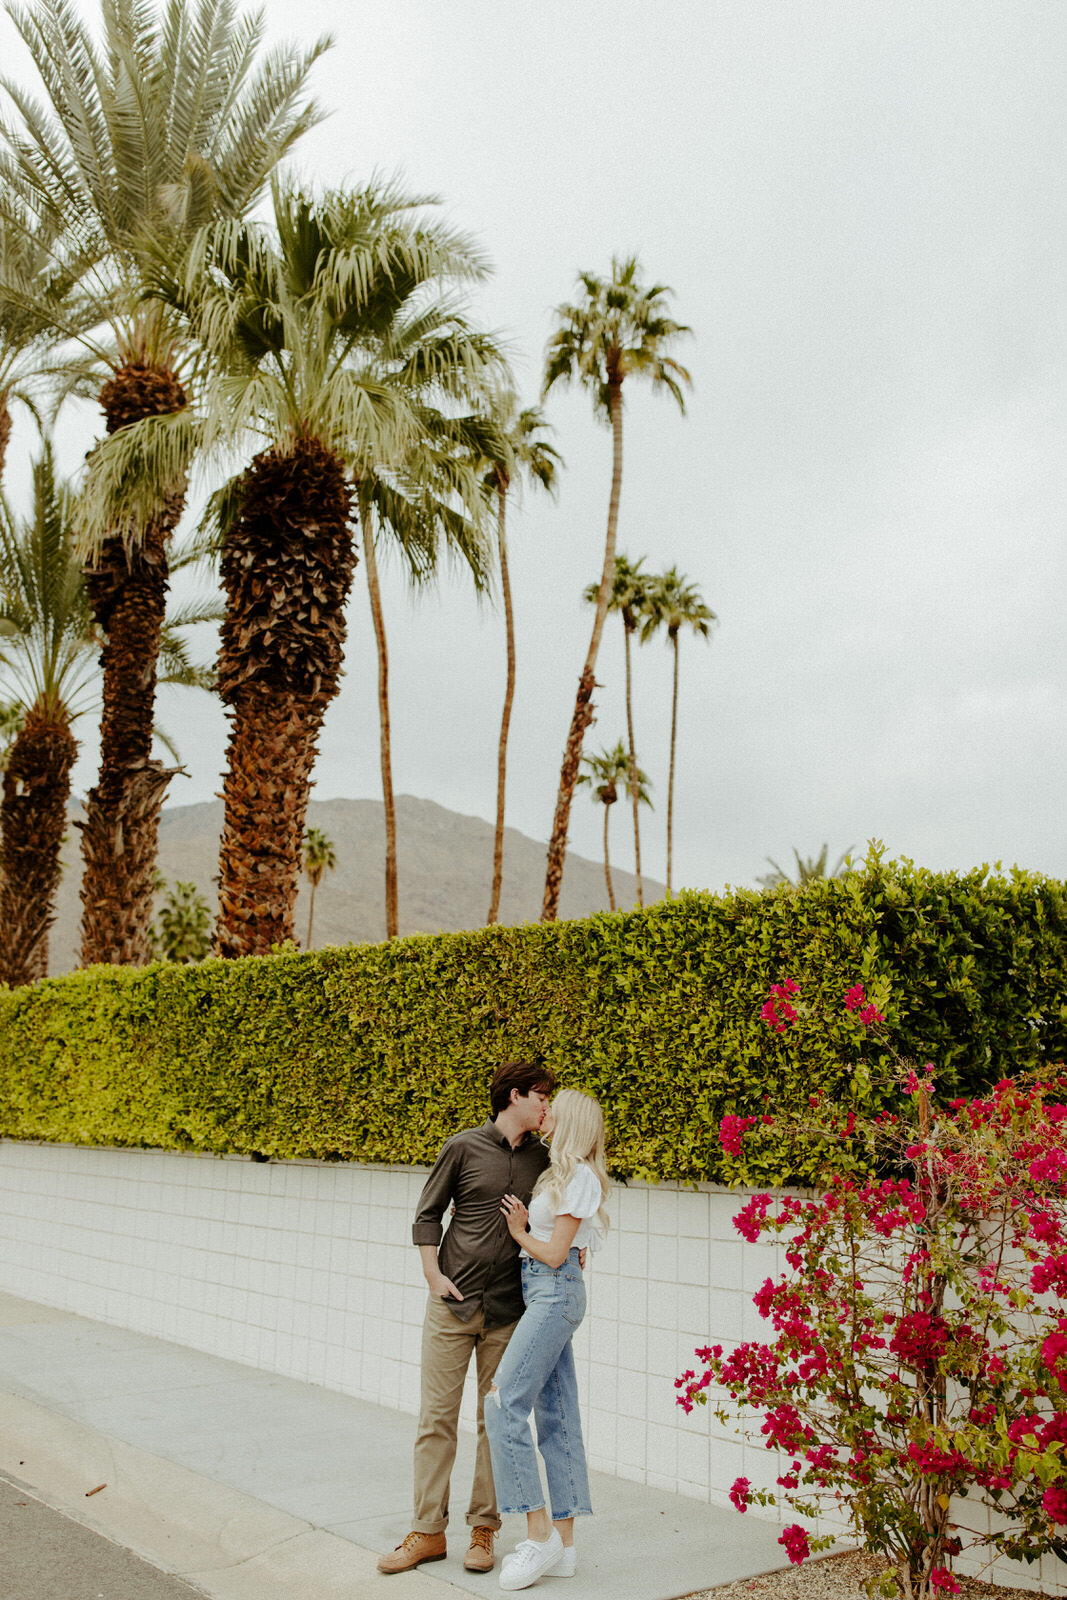 Brianna-Broyles-Photography-Pink-Palm-Springs-Engagement-Session-26.jpg